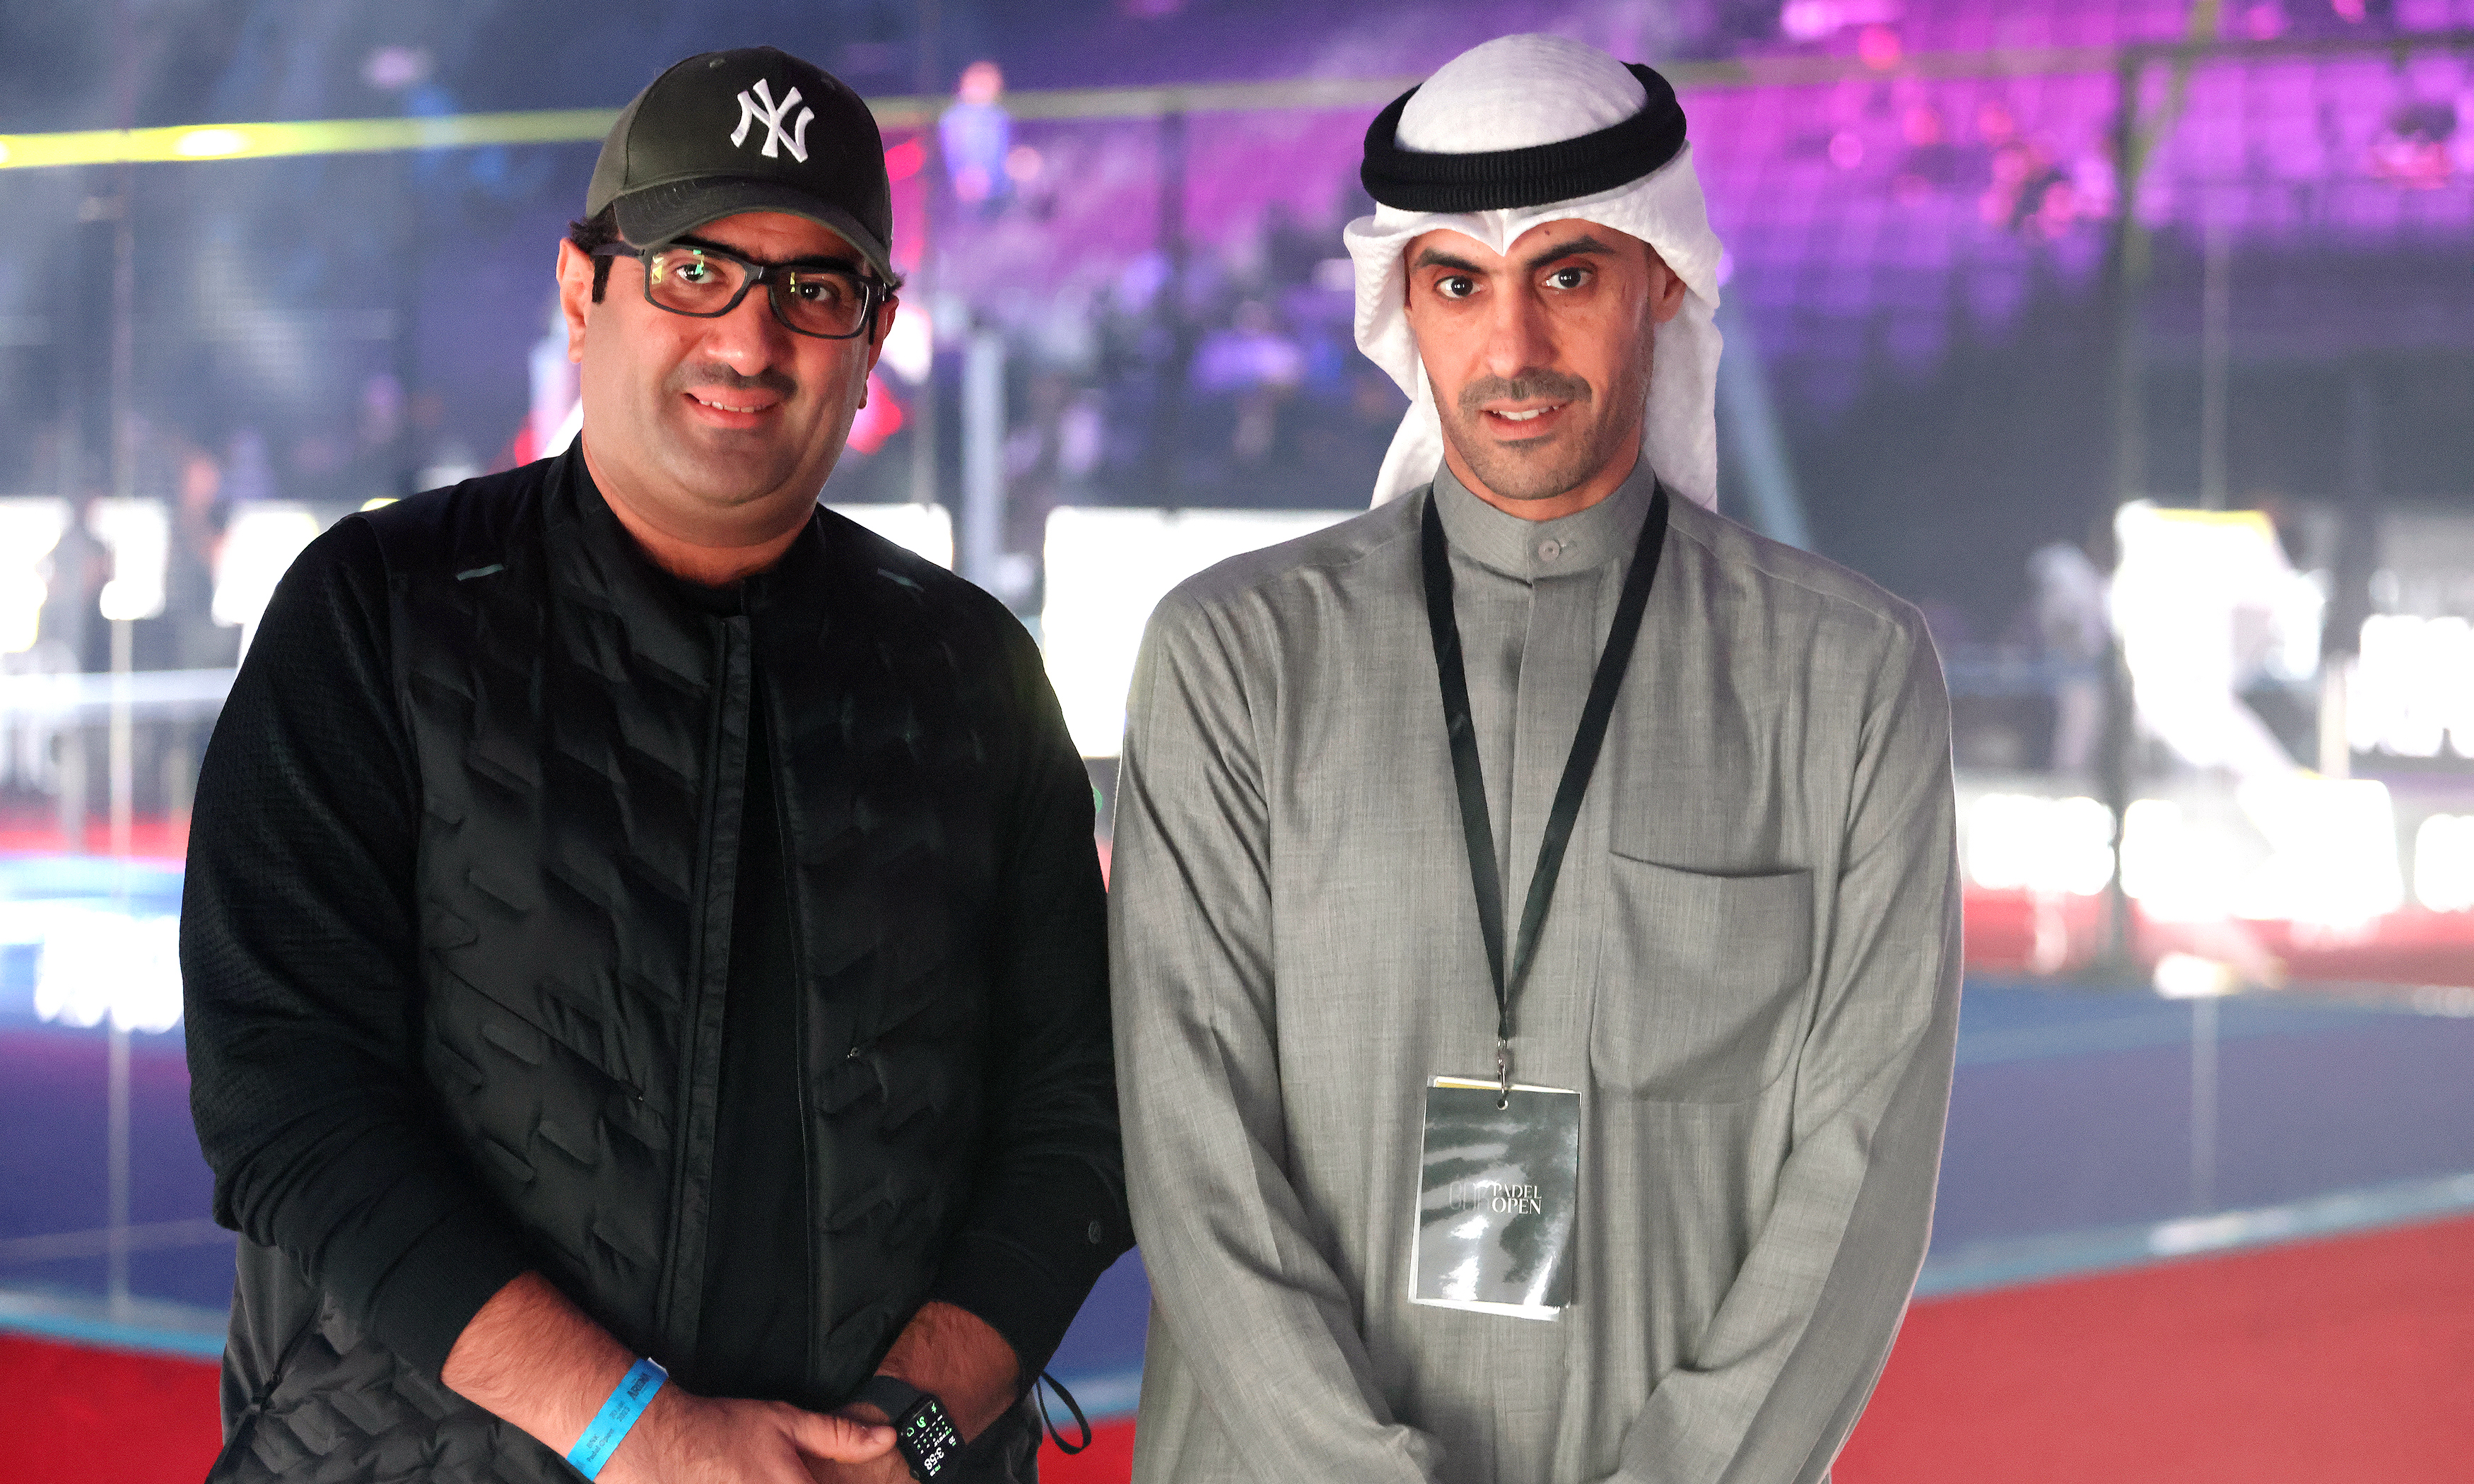 Bader Al-Kharafi (right) with Former Minister of Commerce and Industry Khaled Al-Roudan (left)